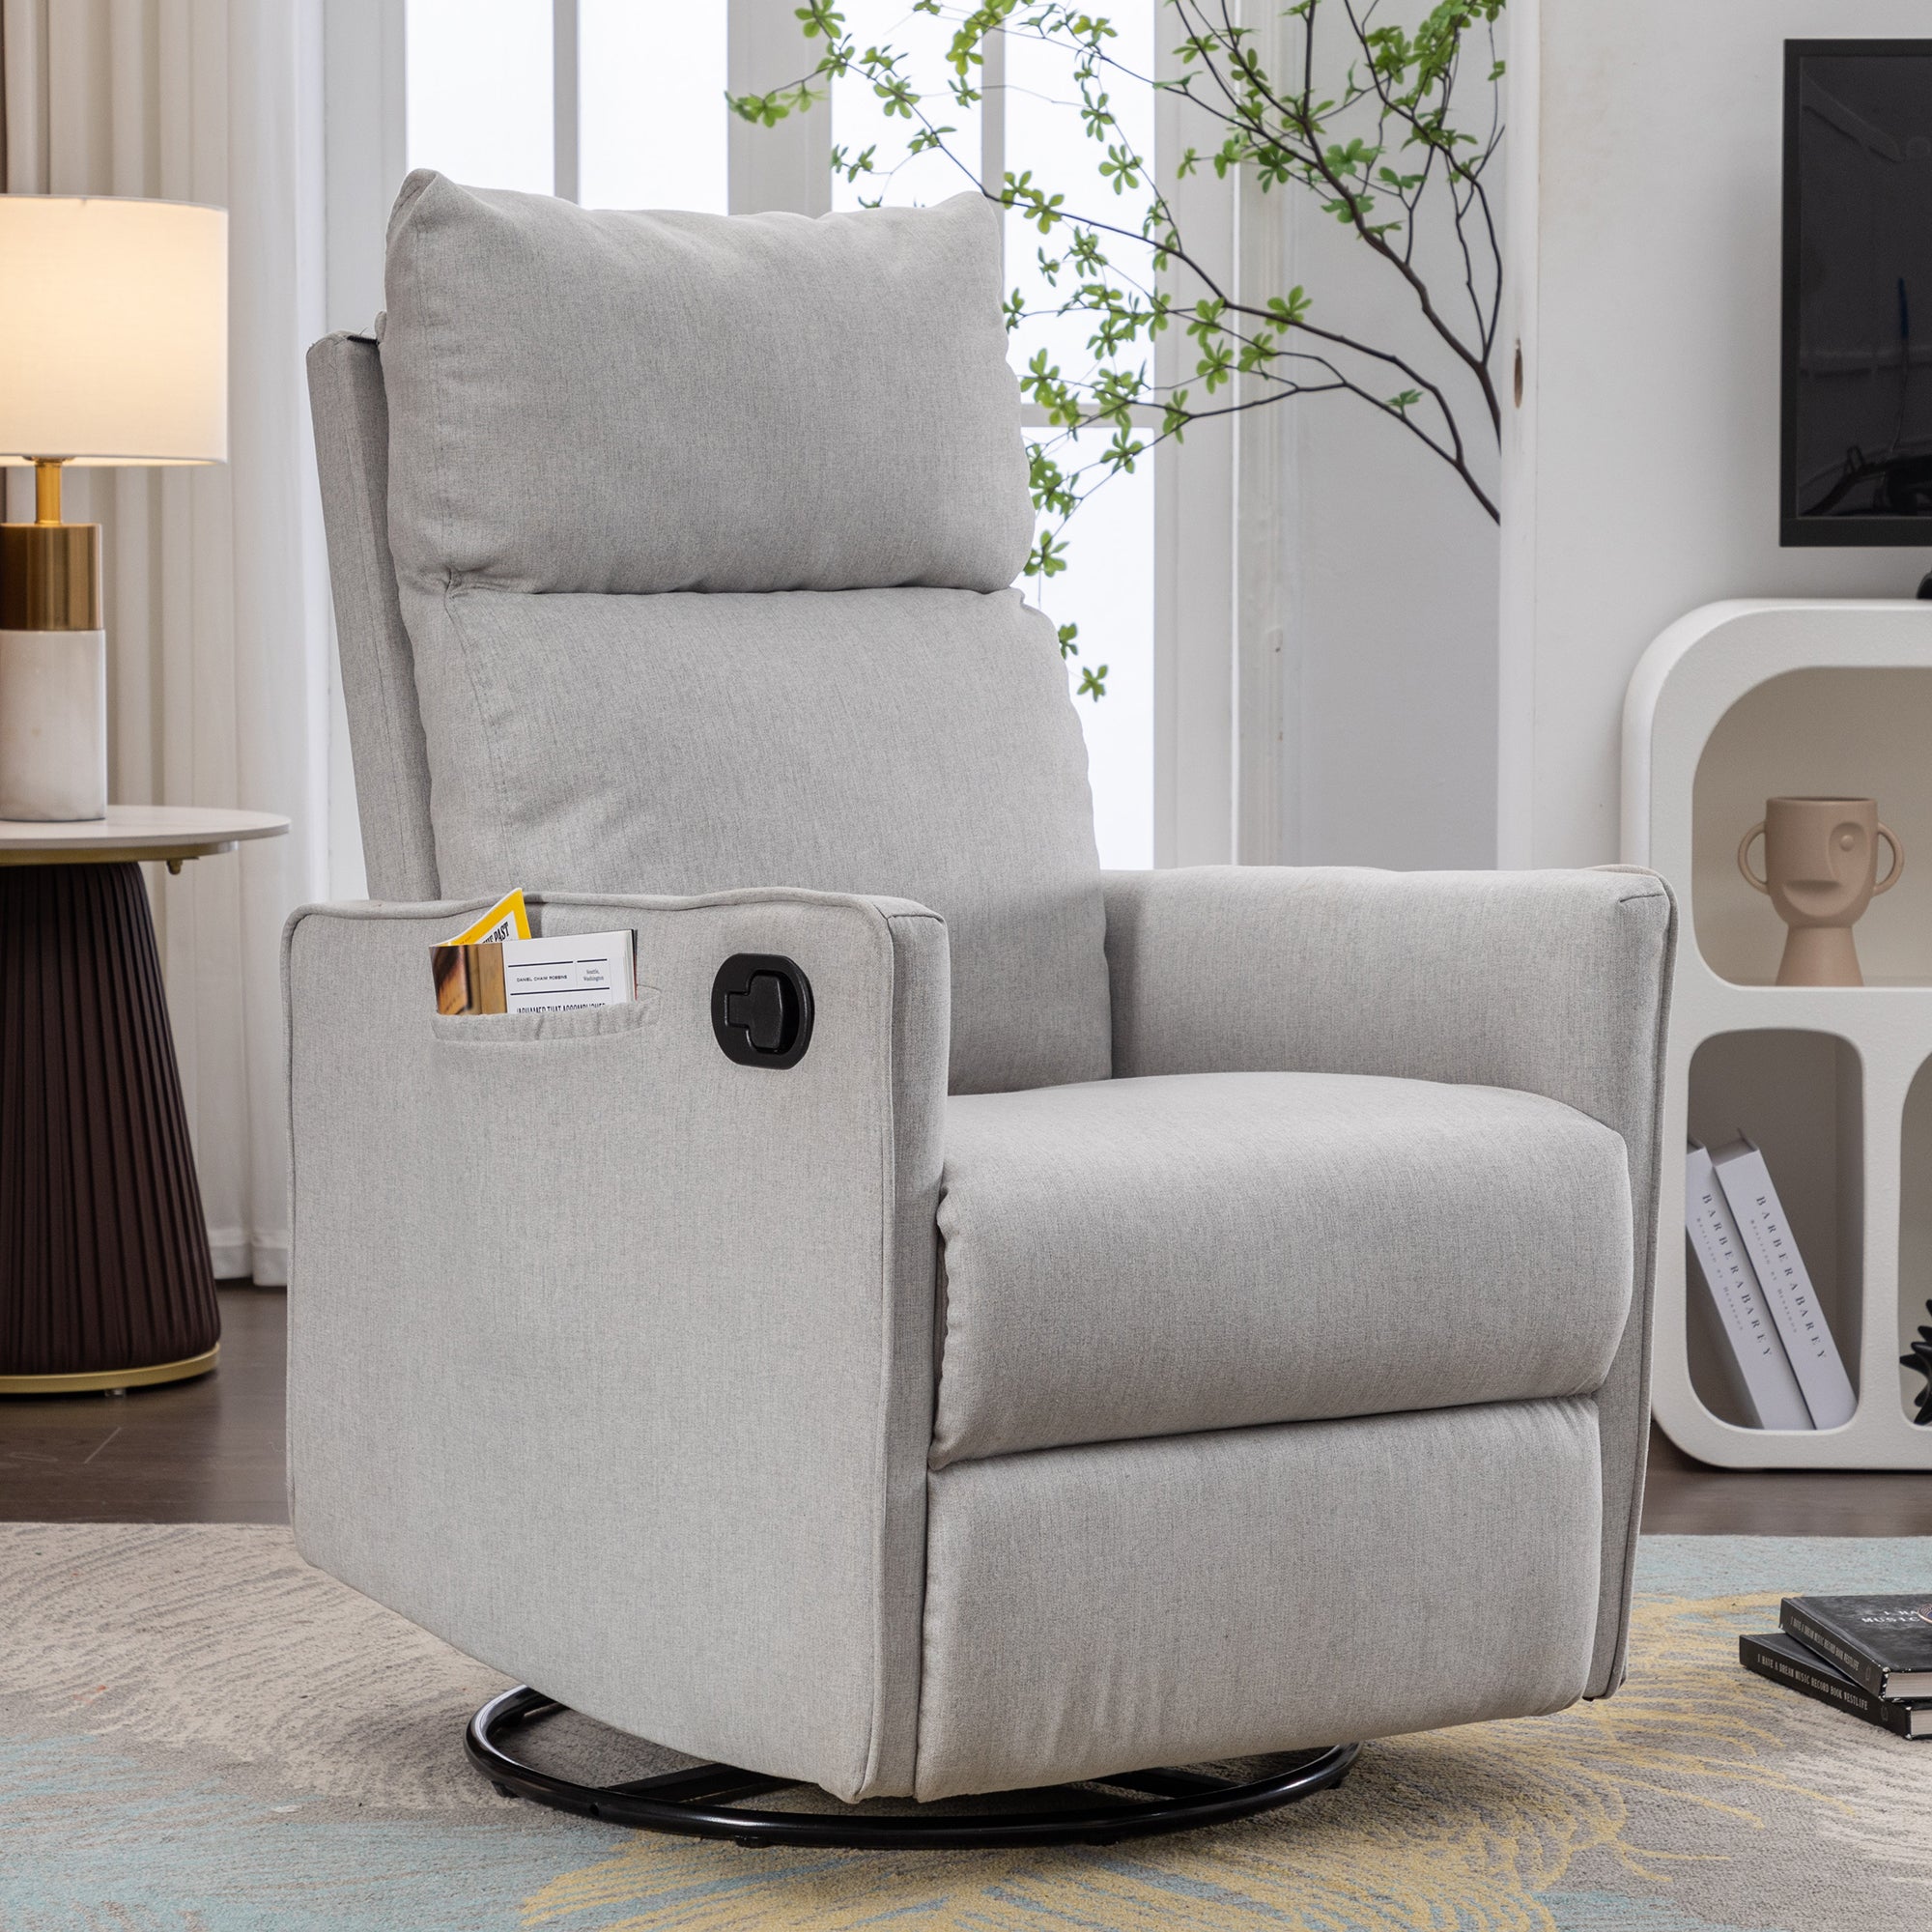 🆓🚛 Cotton Linen Fabric Swivel Rocking Chair Glider Rocker Recliner Nursery Chair With Adjustable Back and Footrest for Living Room Indoor, Light Gray